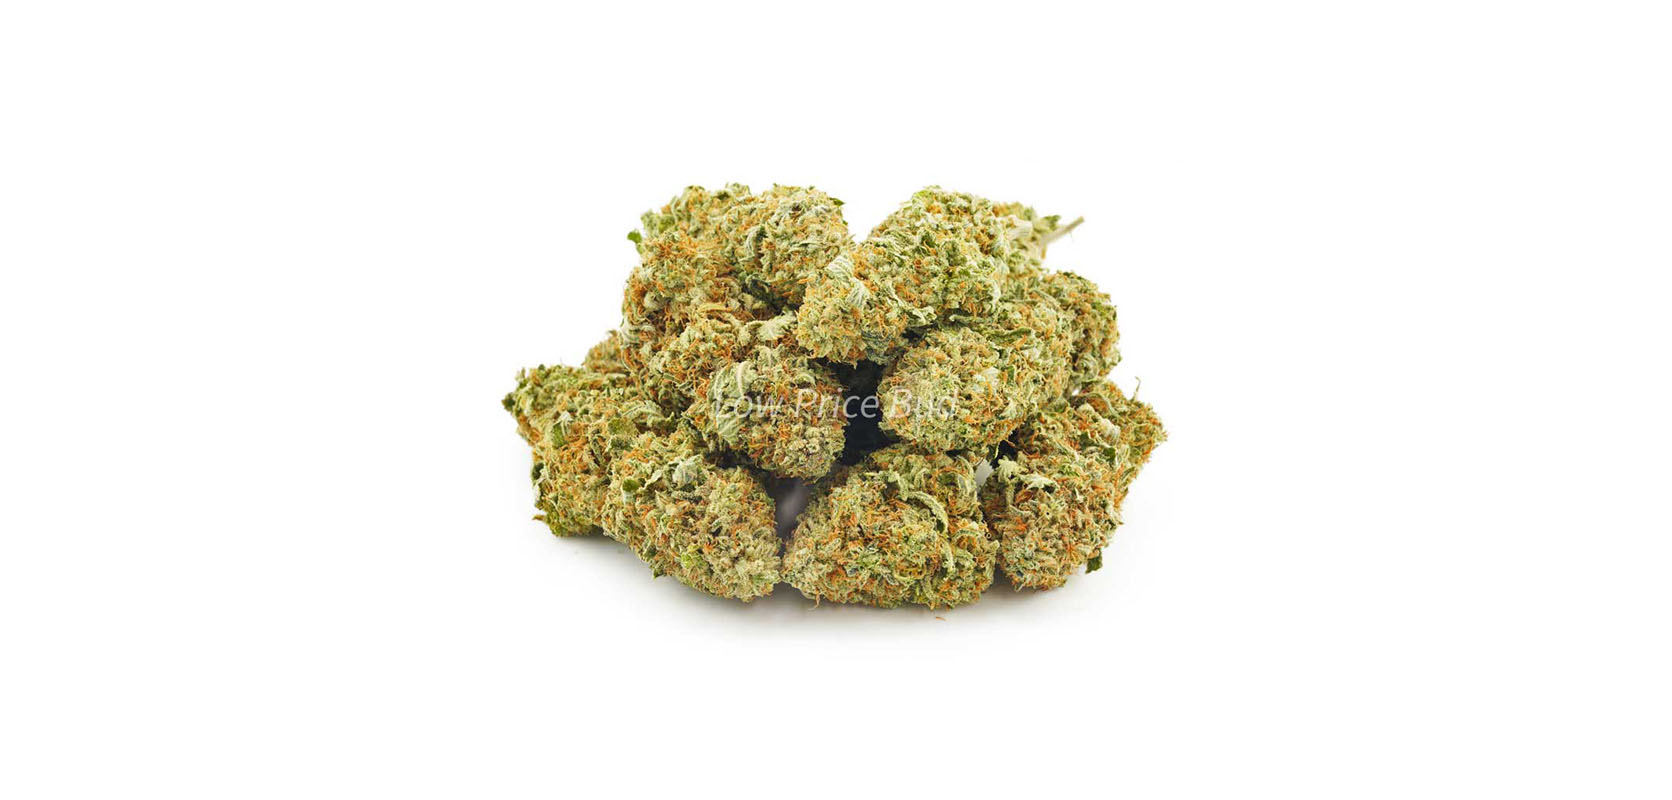 Buy Girl Scout Cookies weed online Canada at Low Price Bud online dispensary Canada. buy weed online canada. weed stores. budget buds.